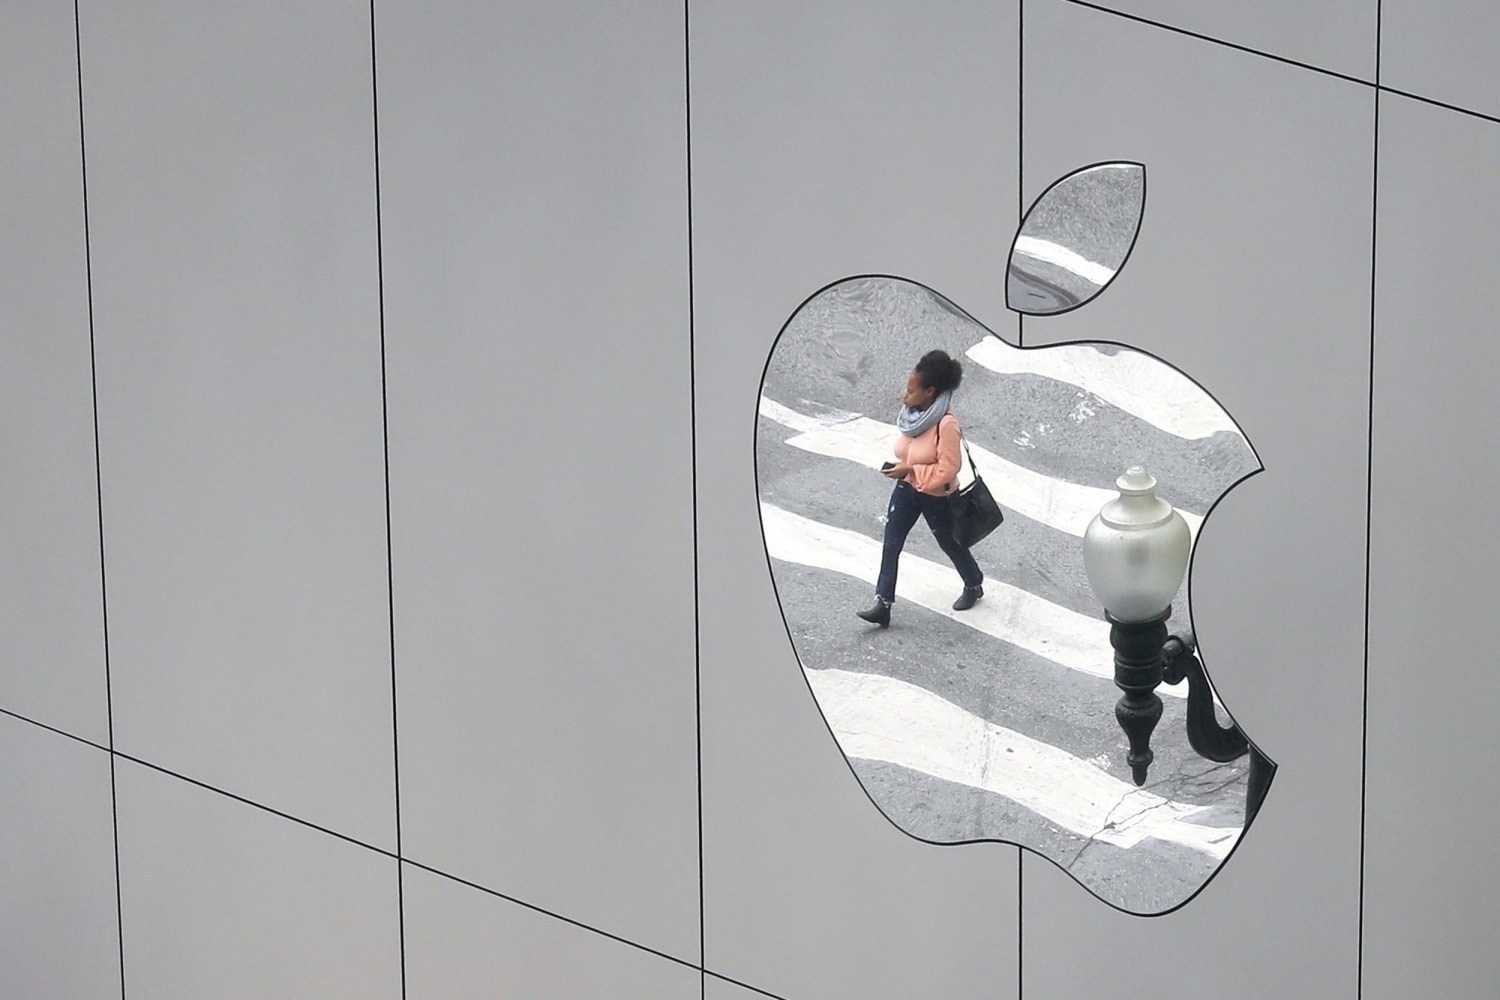 Apple says it will notify users whose iPhones were hacked by spyware